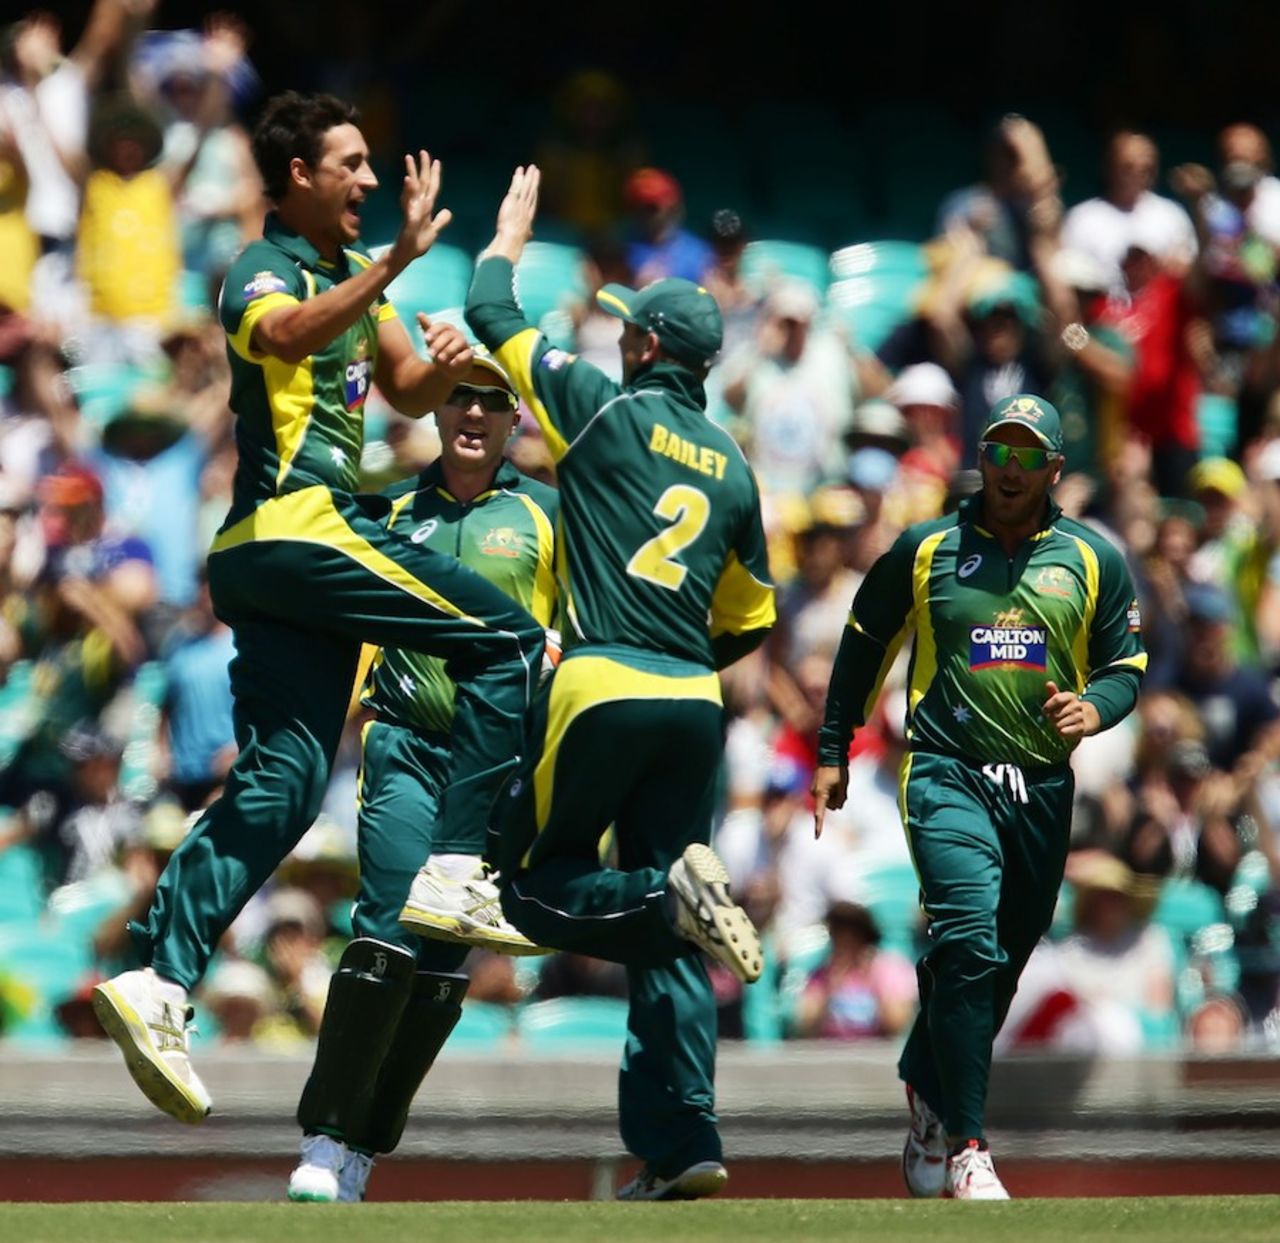 Mitchell Starc took two wickets in his first over, Australia v England, Carlton Mid Tri-Series, Sydney, January 16, 2015